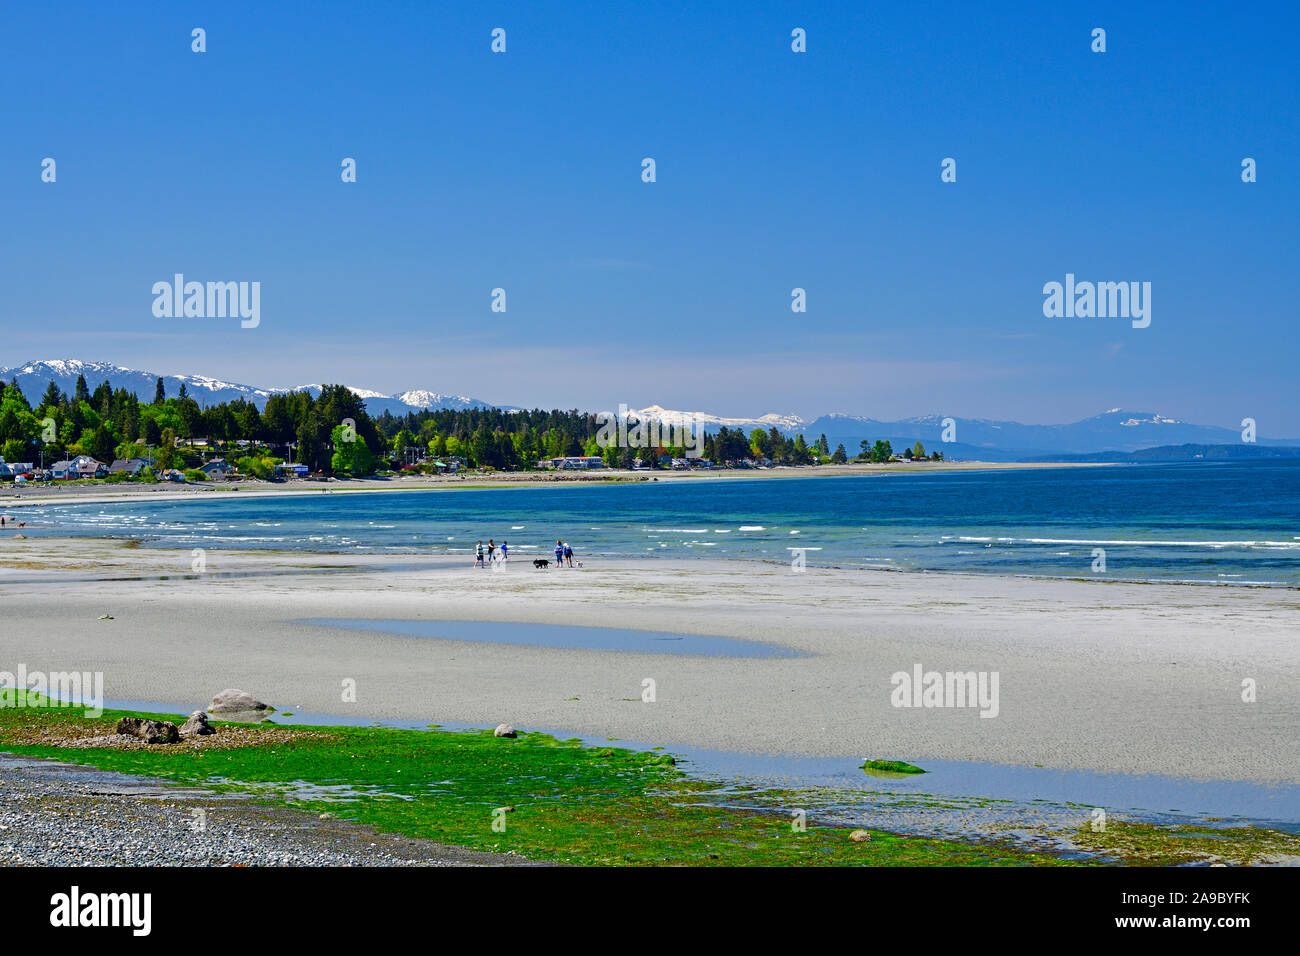 People enjoying a beautiful day relaxing and playing on Qualicum Beach on Vancouver Island British Columbia Canada. Stock Photo